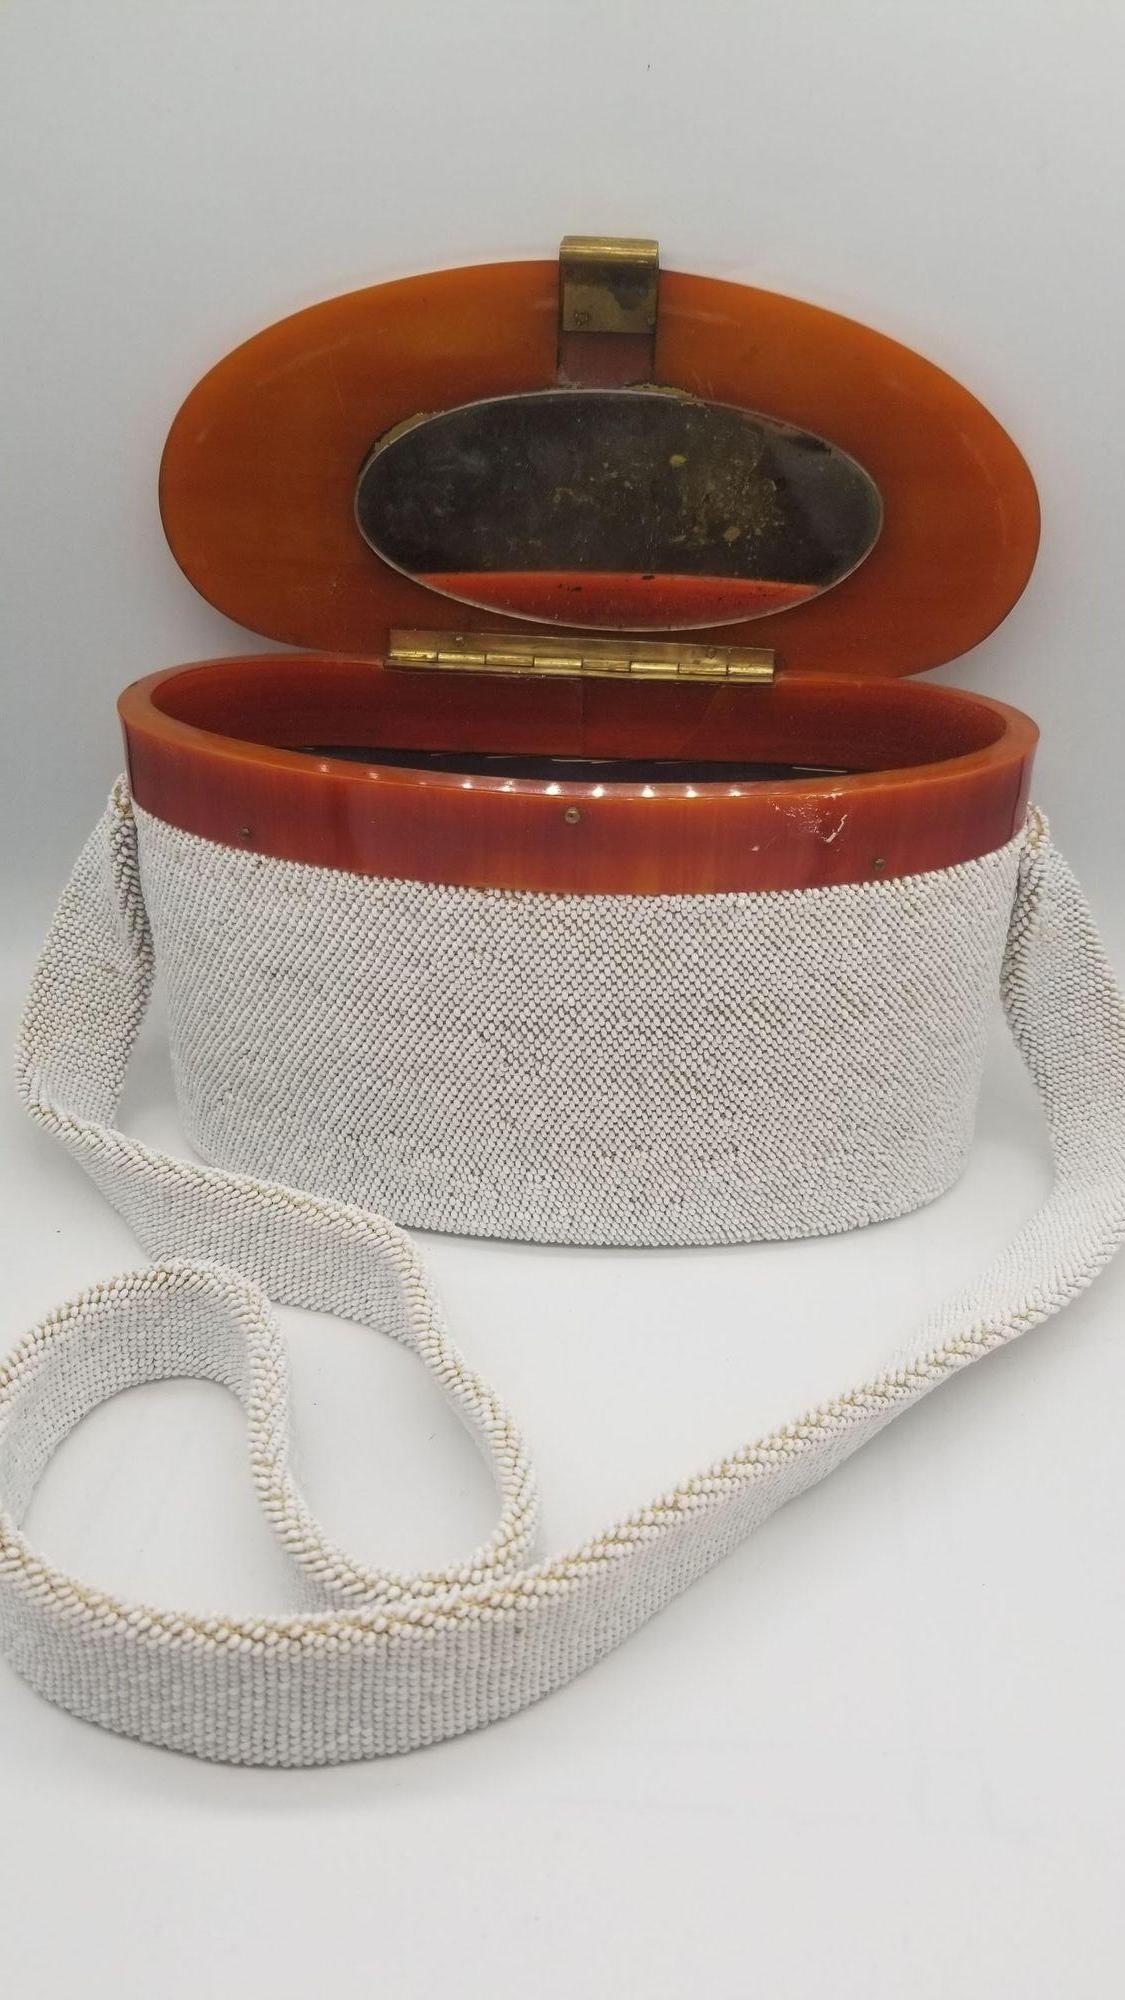 White Caviar Bead Box Purse w Tortoiseshell Celluloid Lid and Long Strap, 1950s For Sale 1